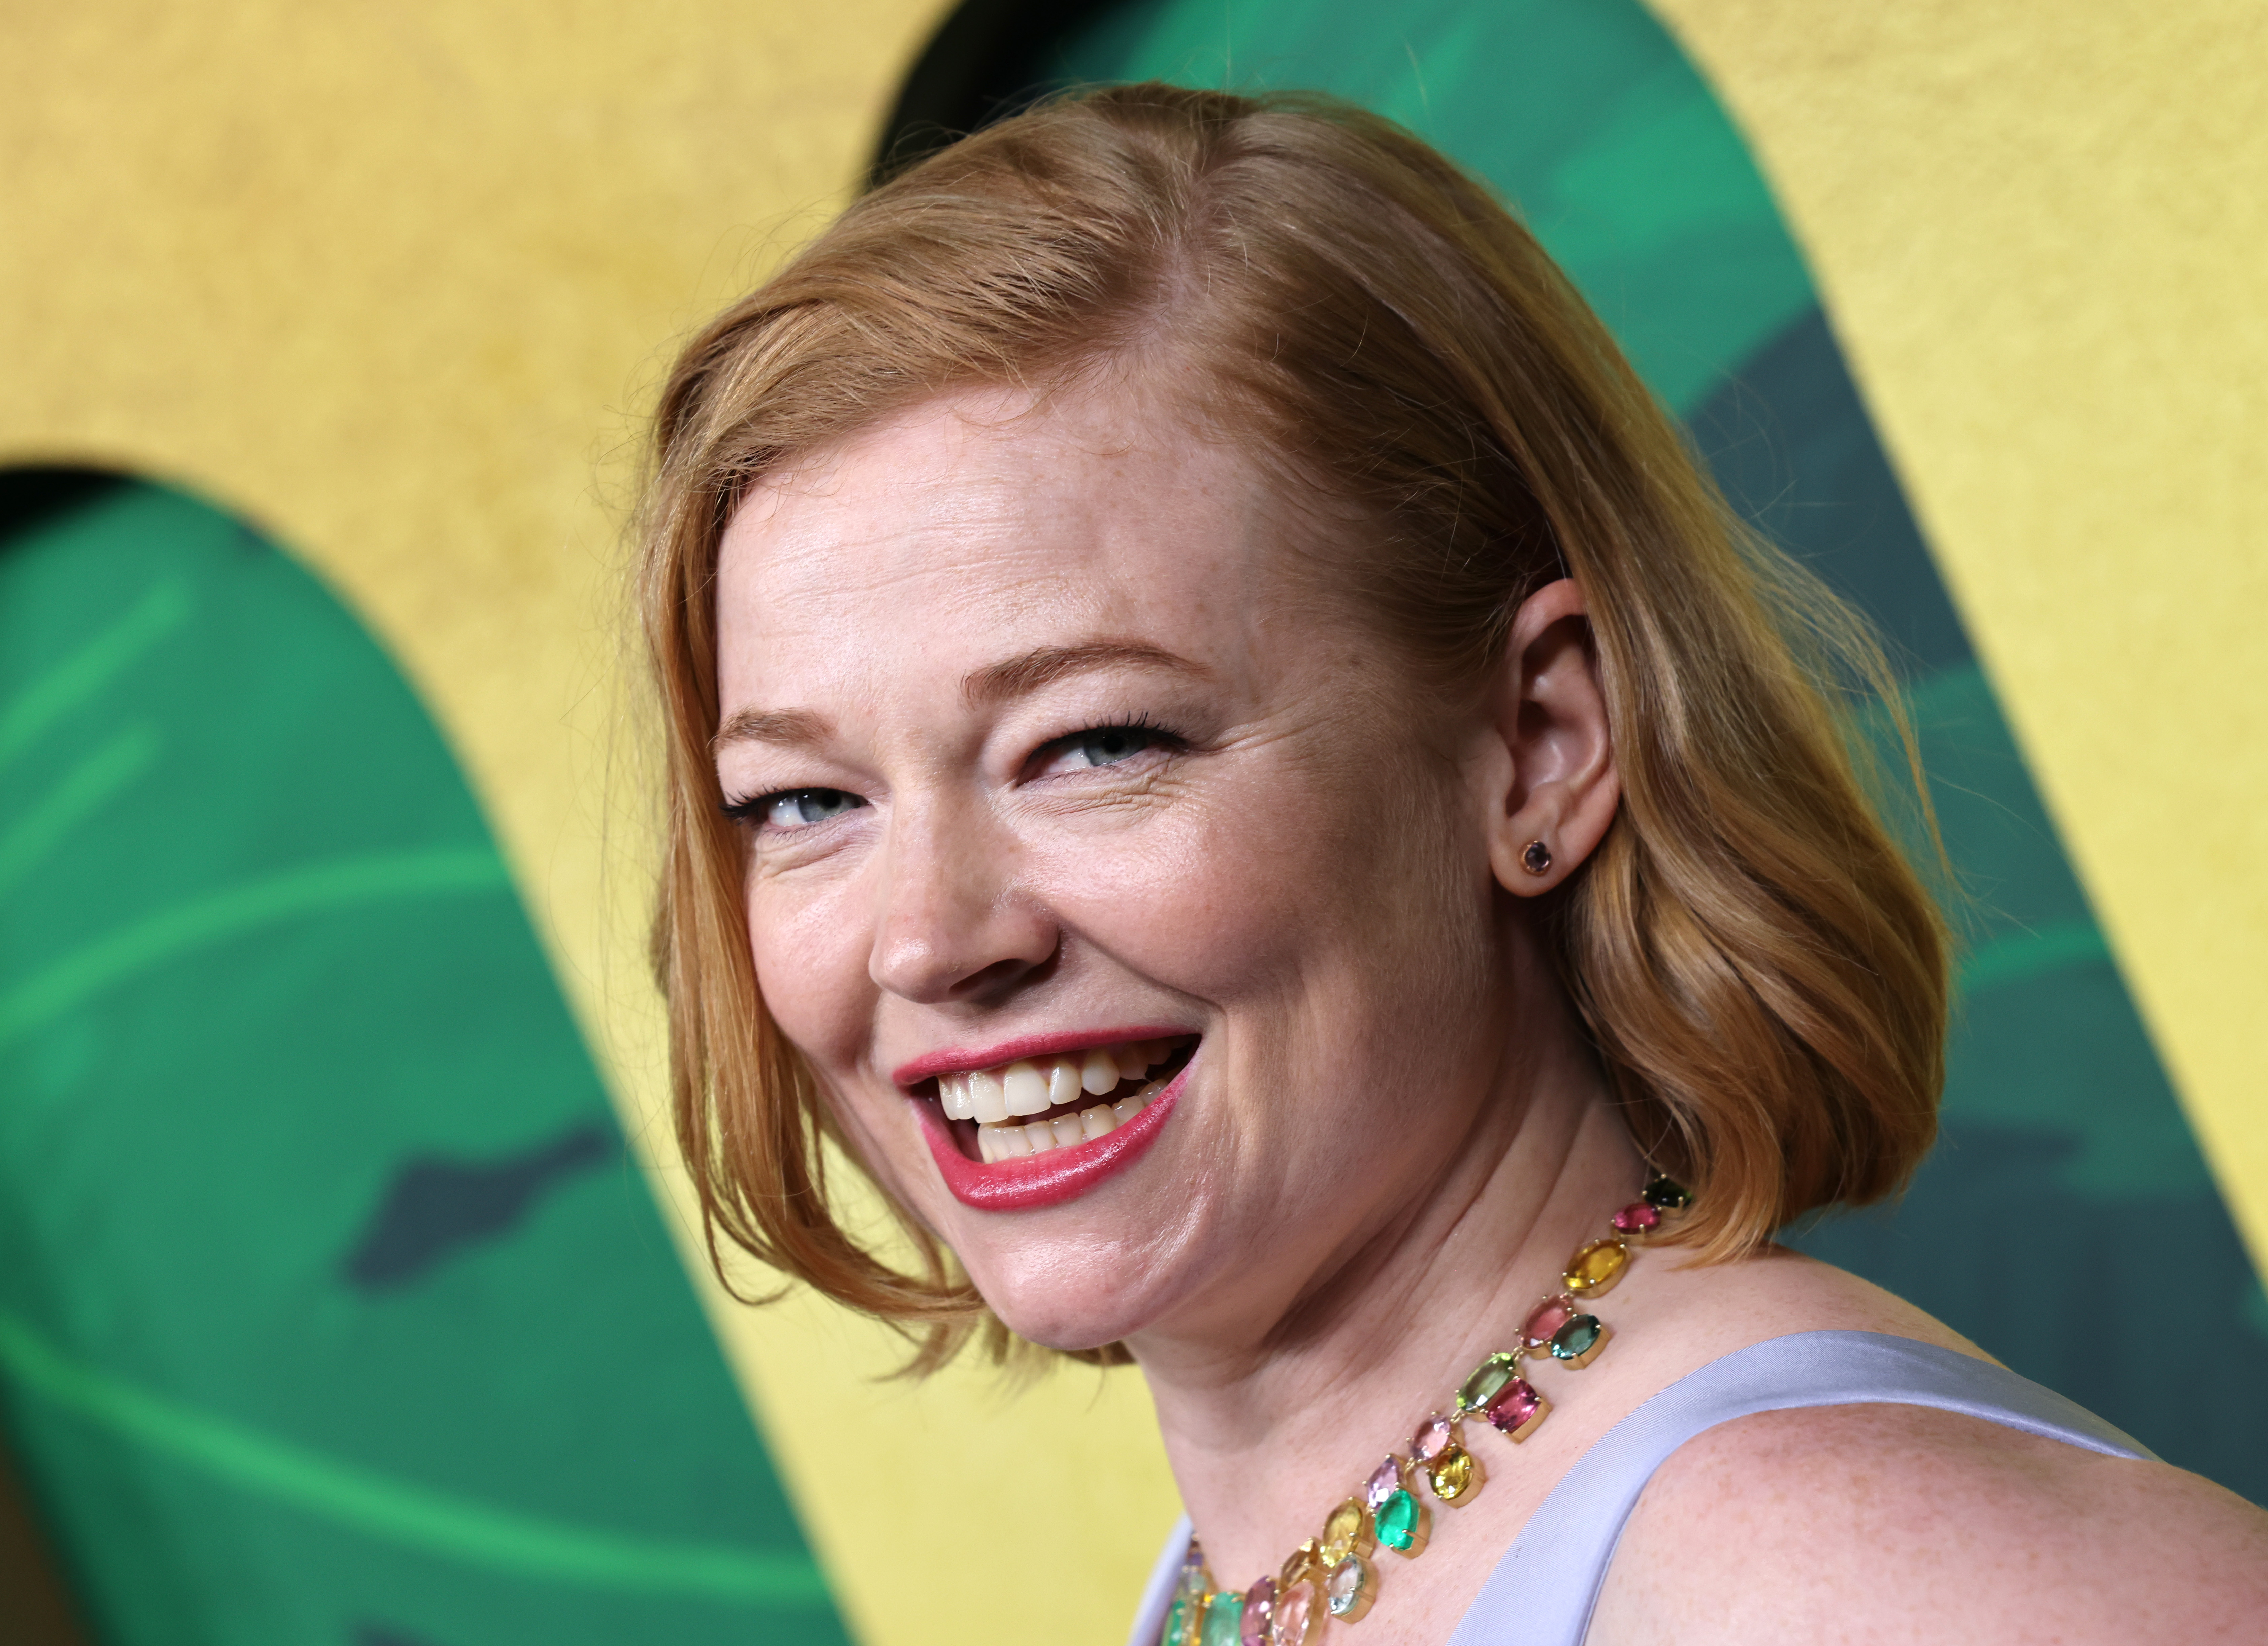 Sarah Snook at San Vicente Bungalows on September 12, 2022, in West Hollywood, California. | Source: Getty Images